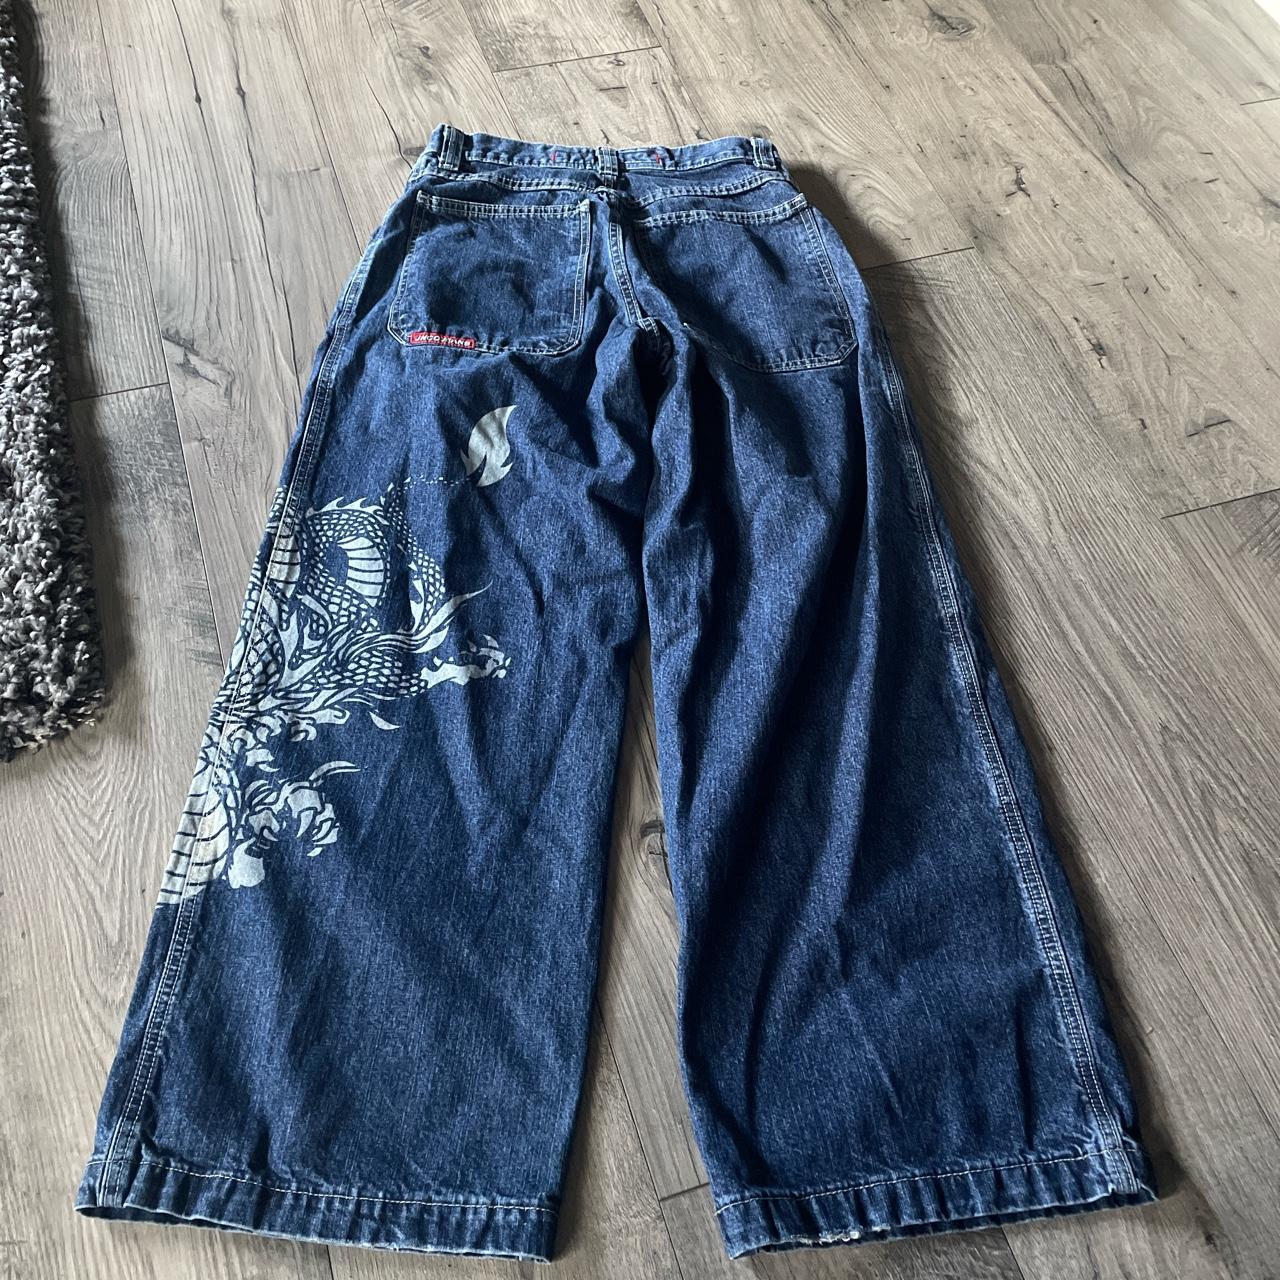 JNCO Men's White and Navy Jeans | Depop